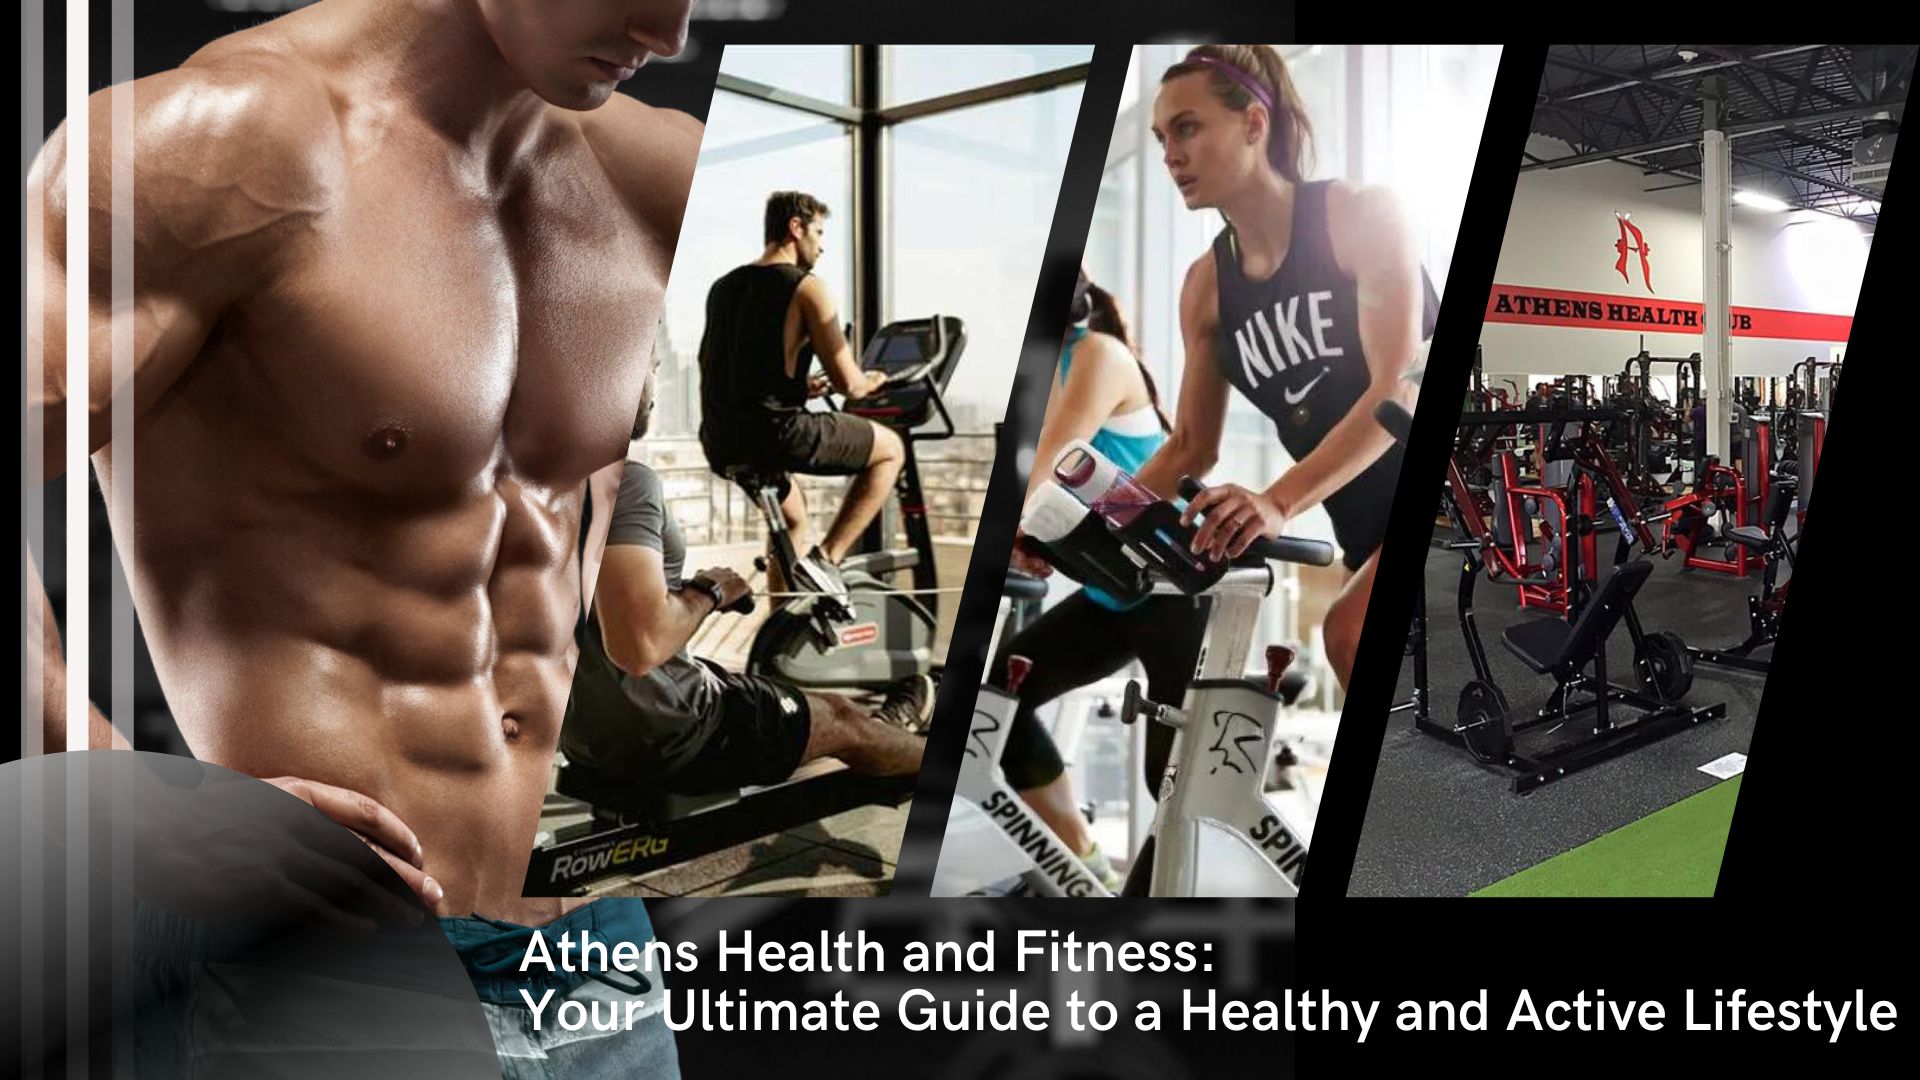 A Complete Overview of Beacon, Zone, and Athens Health and Fitness Programs